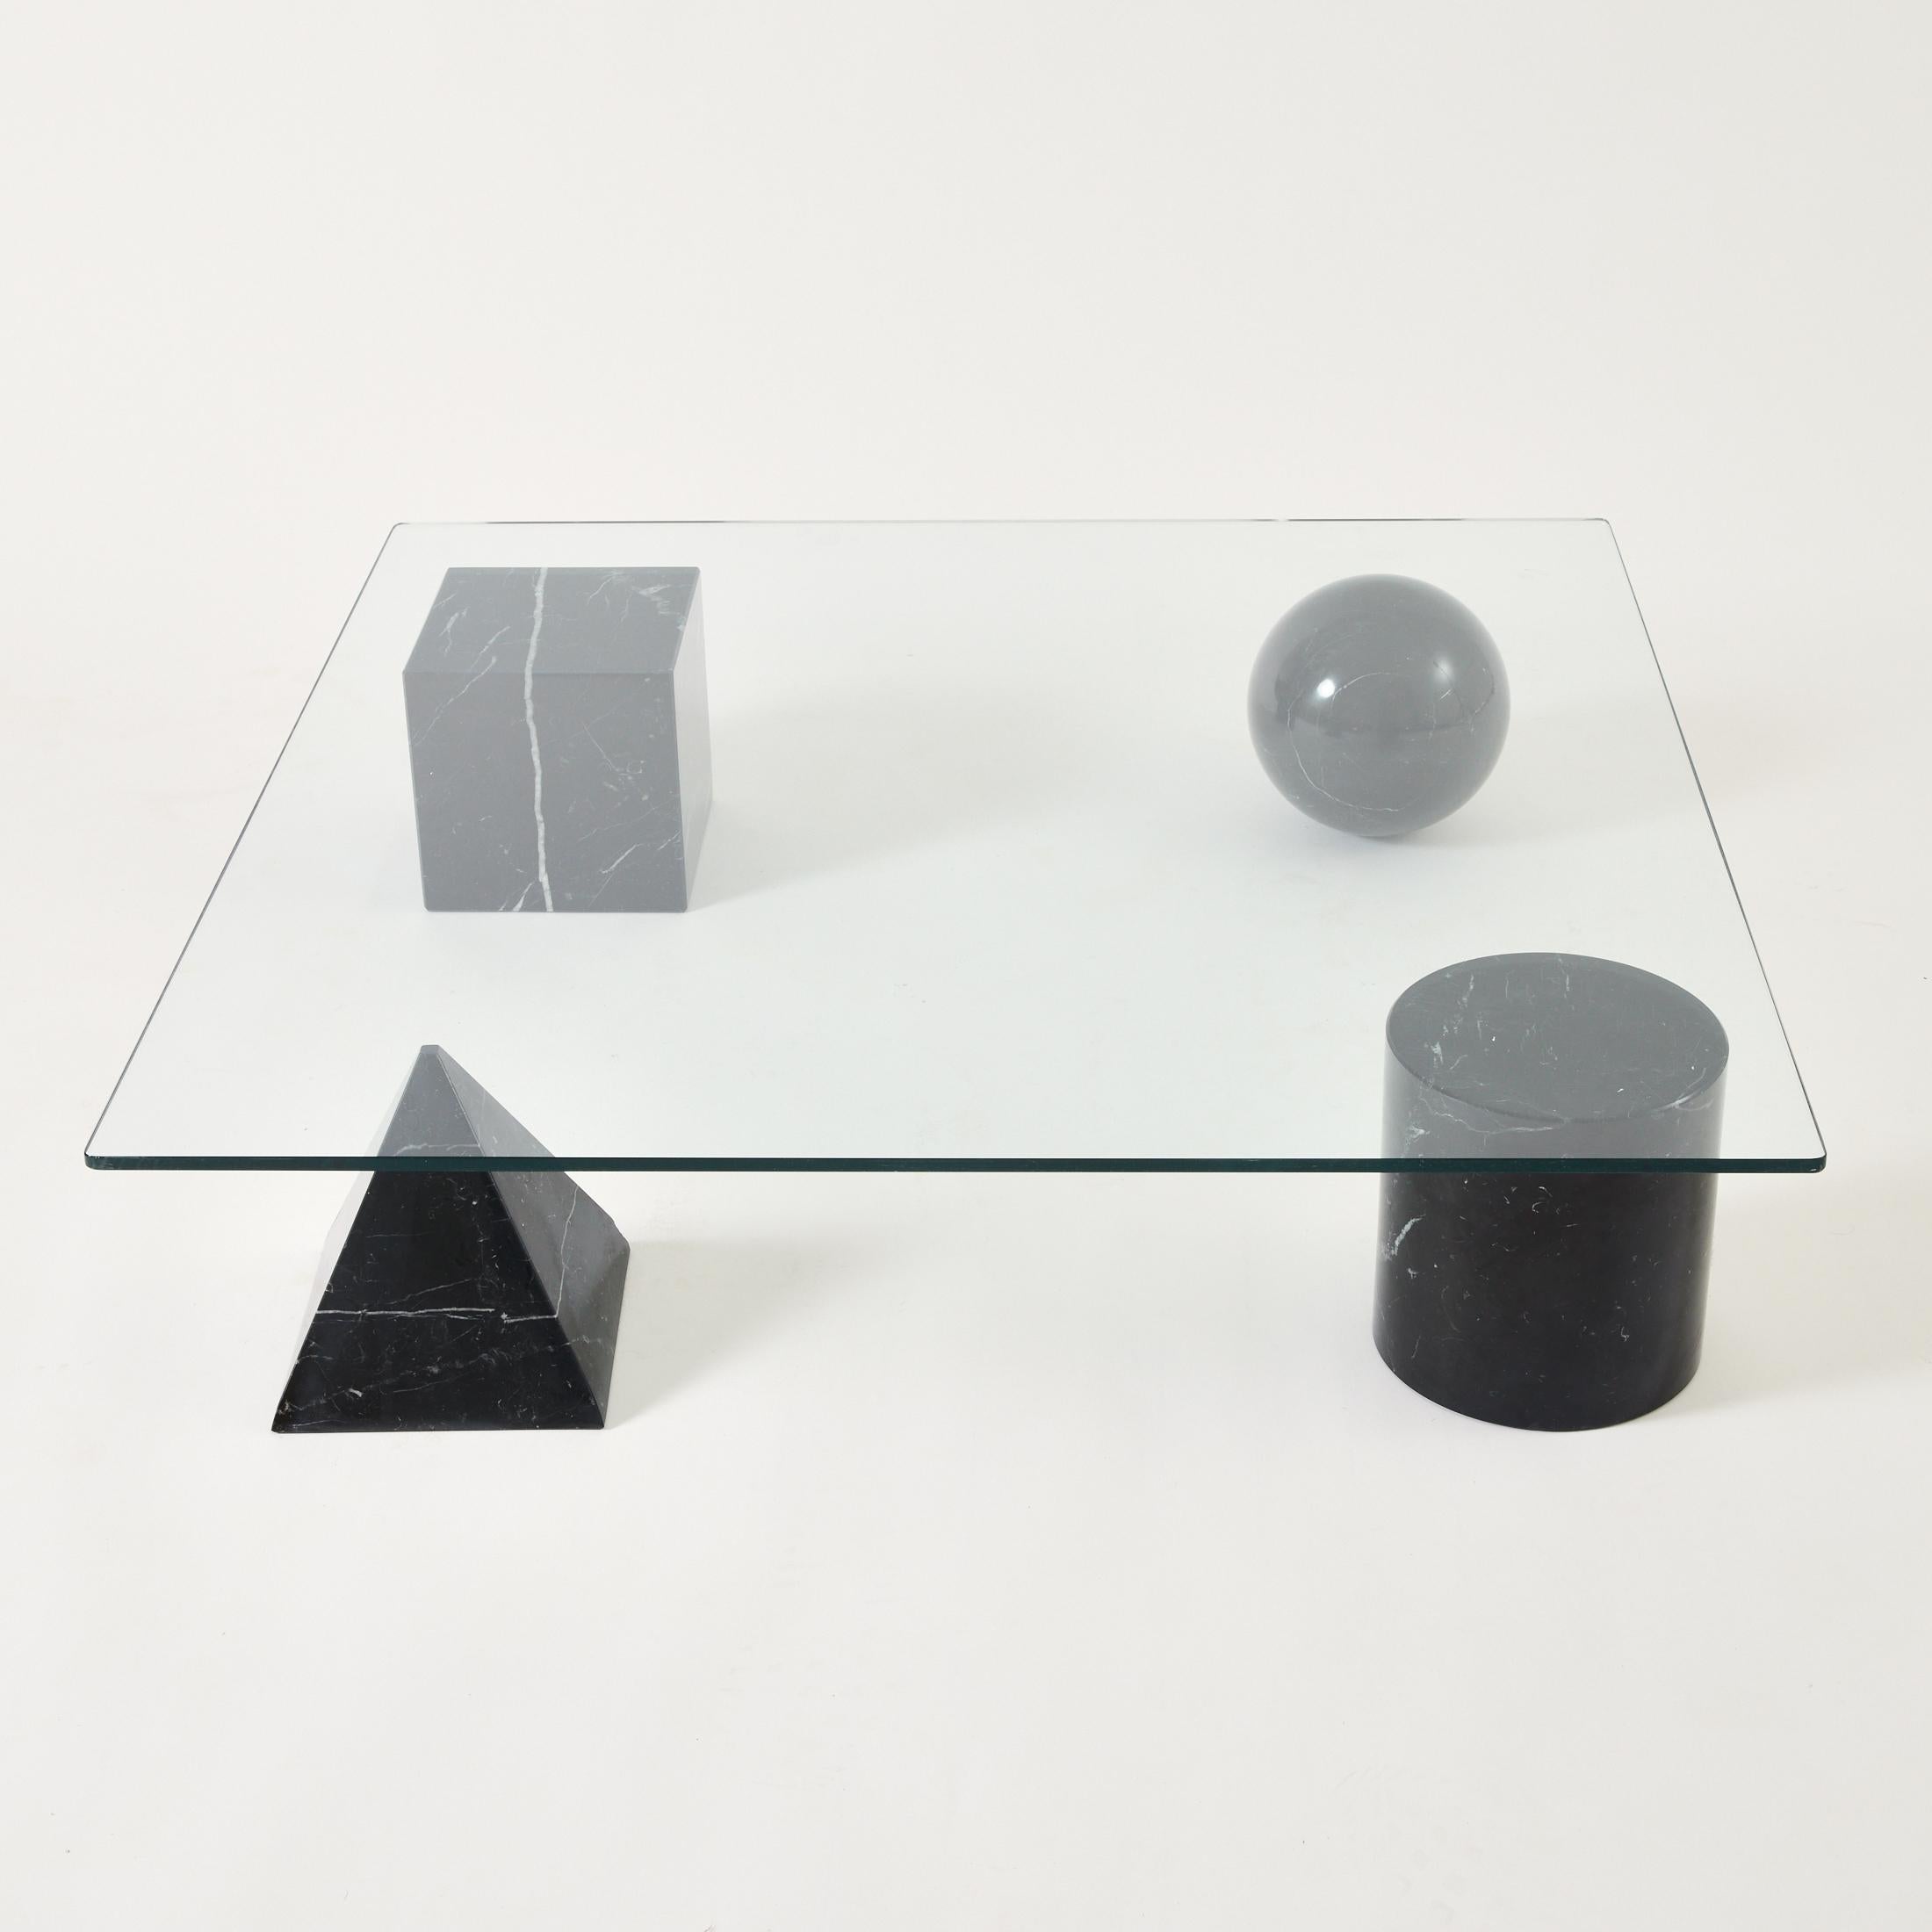 Metaphora table designed by Massimo and Lella Vignelli in 1979 for Martinelli Luce. A glass top sits upon four black marquina marble shapes which represent the four forms of Euclidean geometry. The sphere represents the globe, the pyramid represents